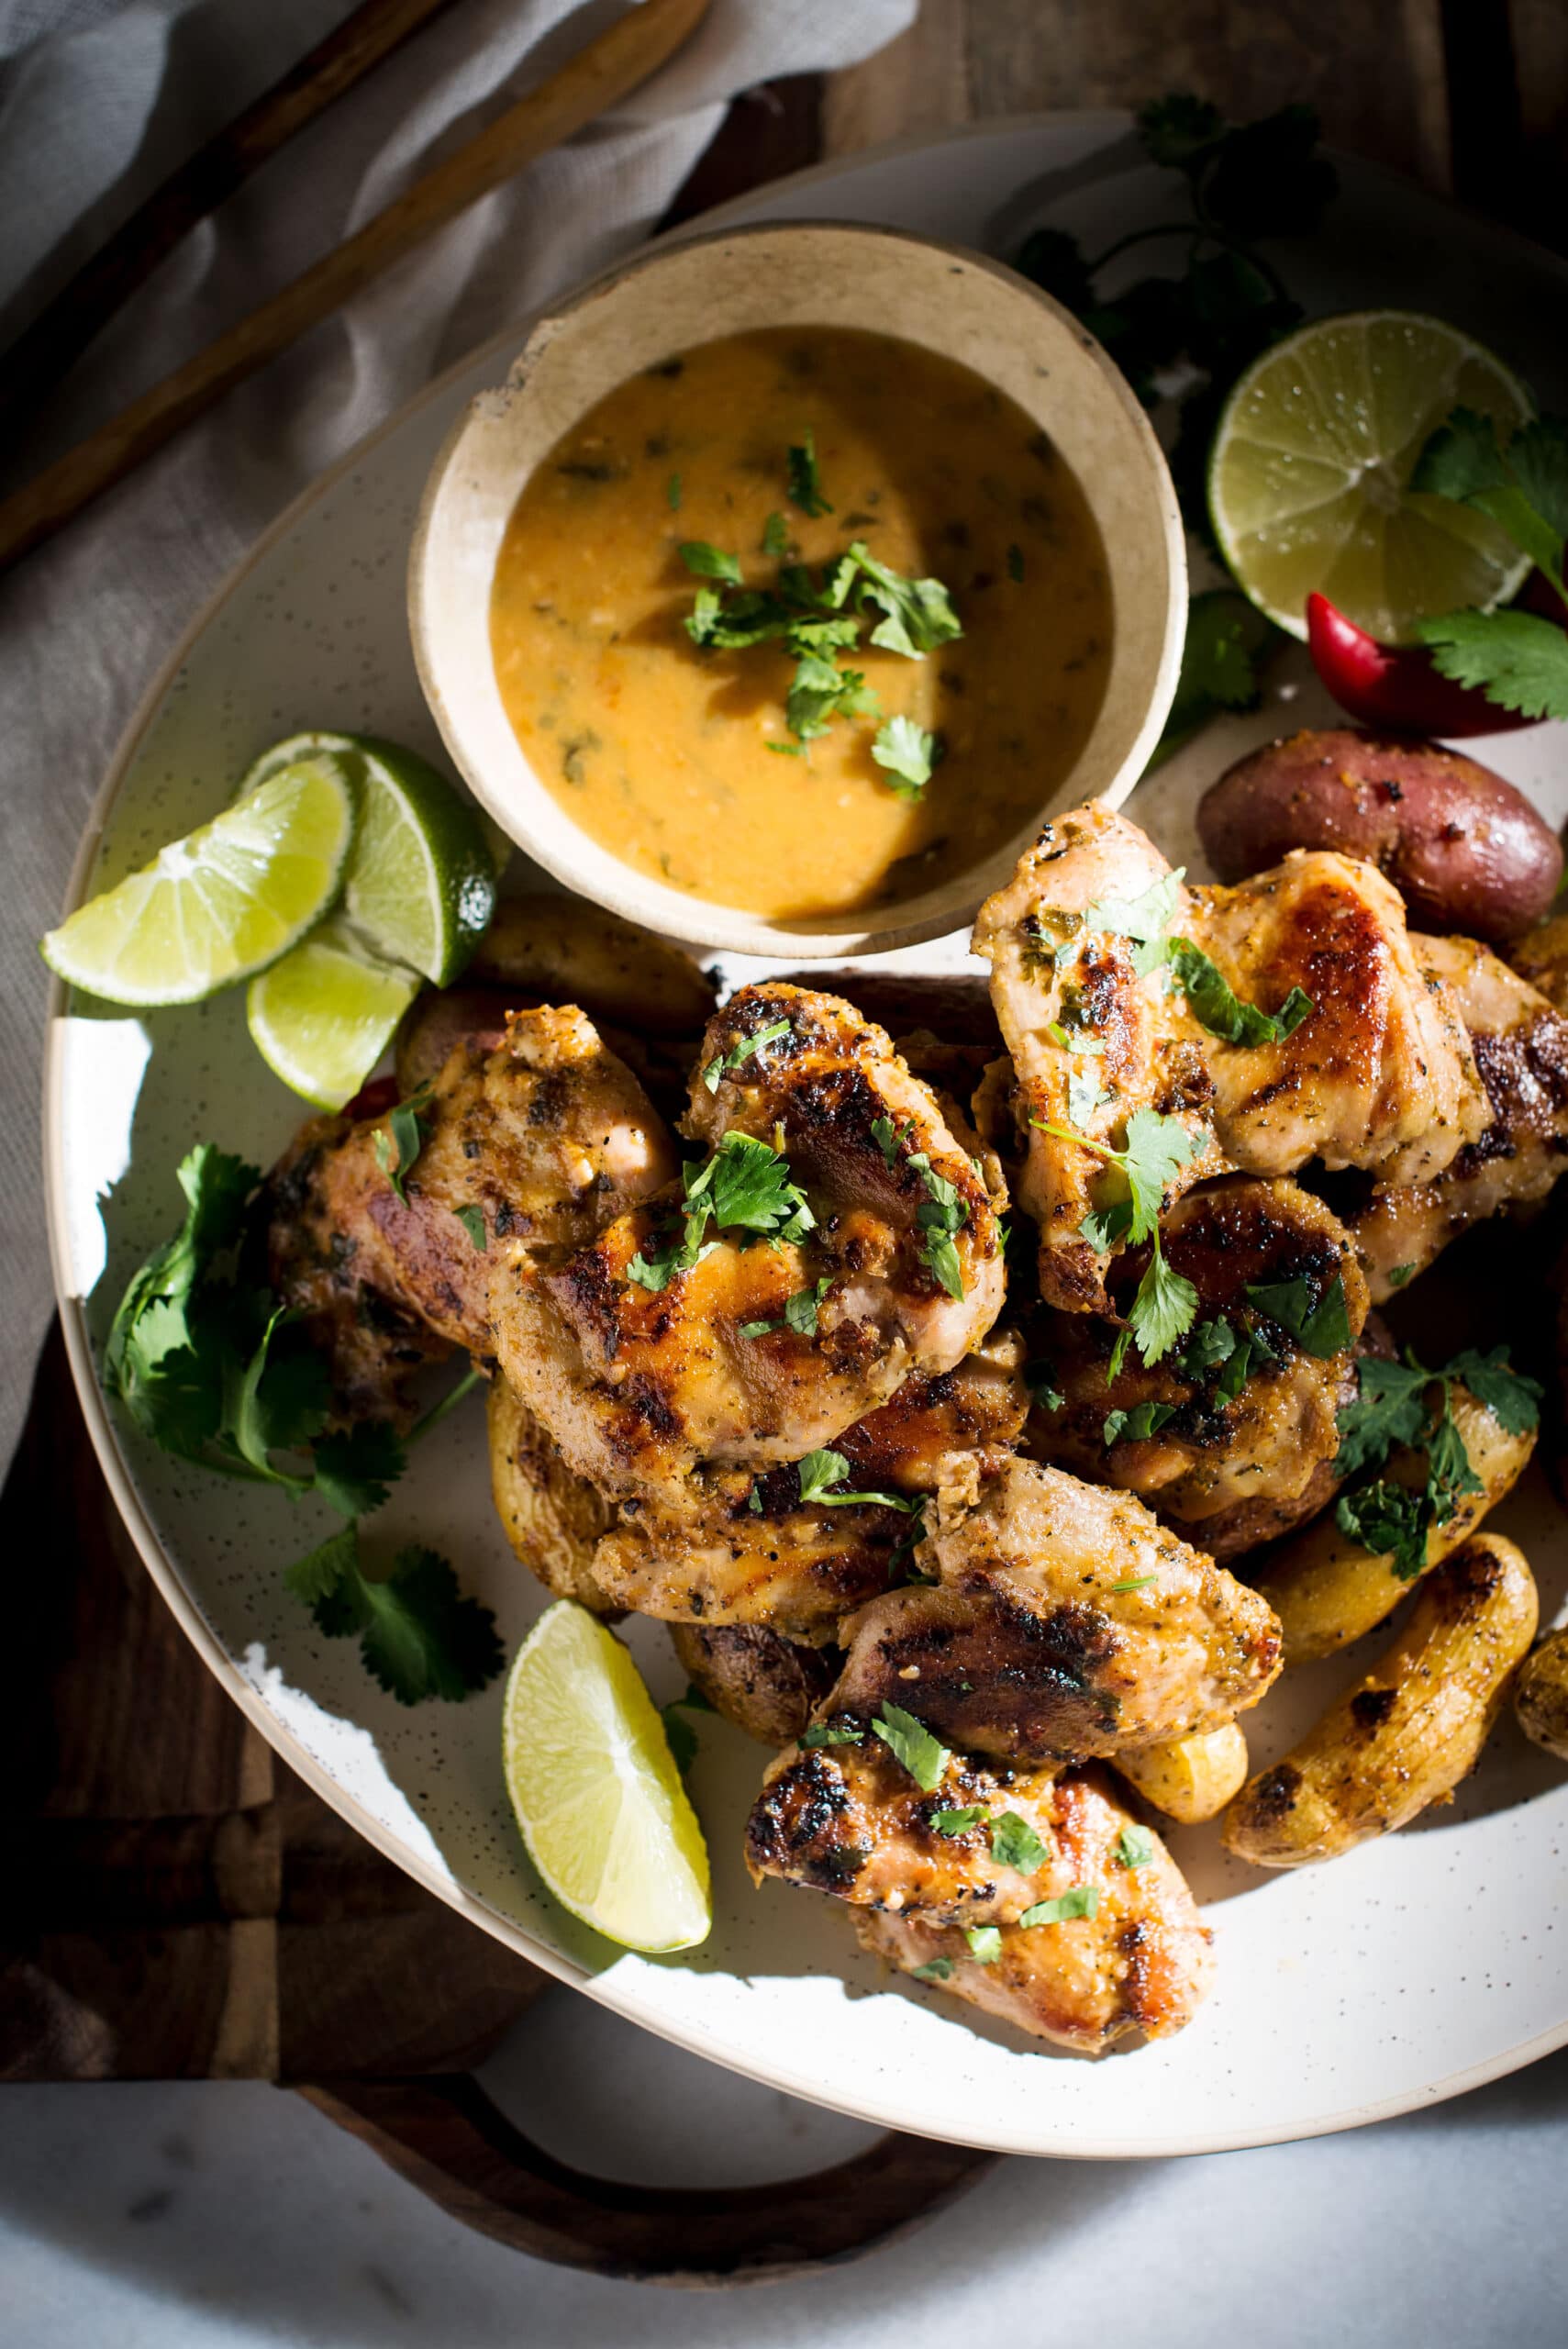 Spicy chicken with dipping sauce and lime wedges